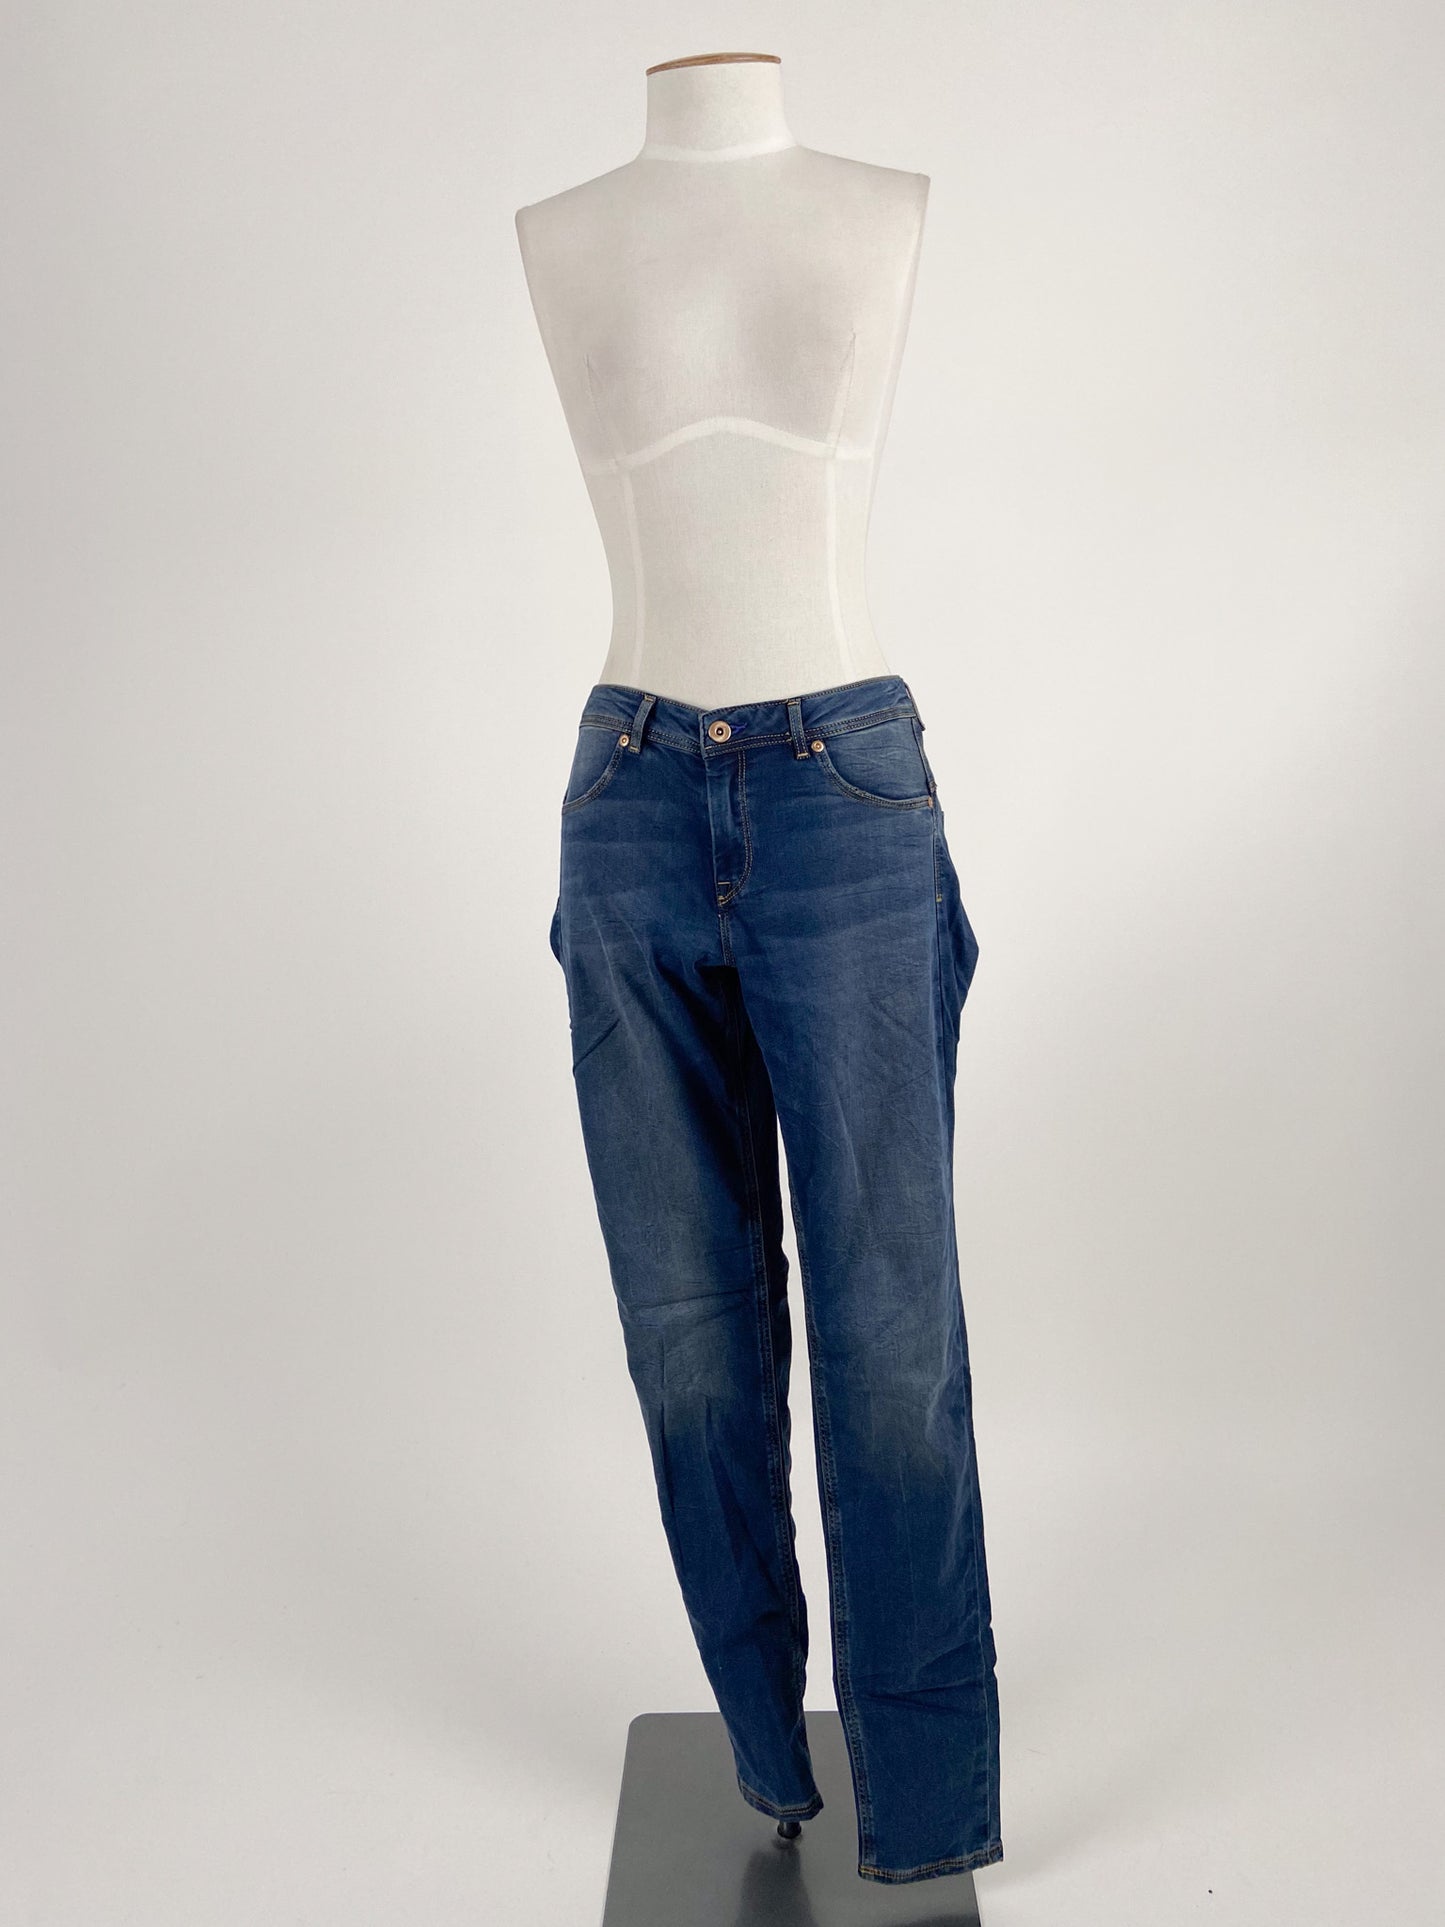 Feather Soft | Blue Casual/Cocktail Jeans | Size S